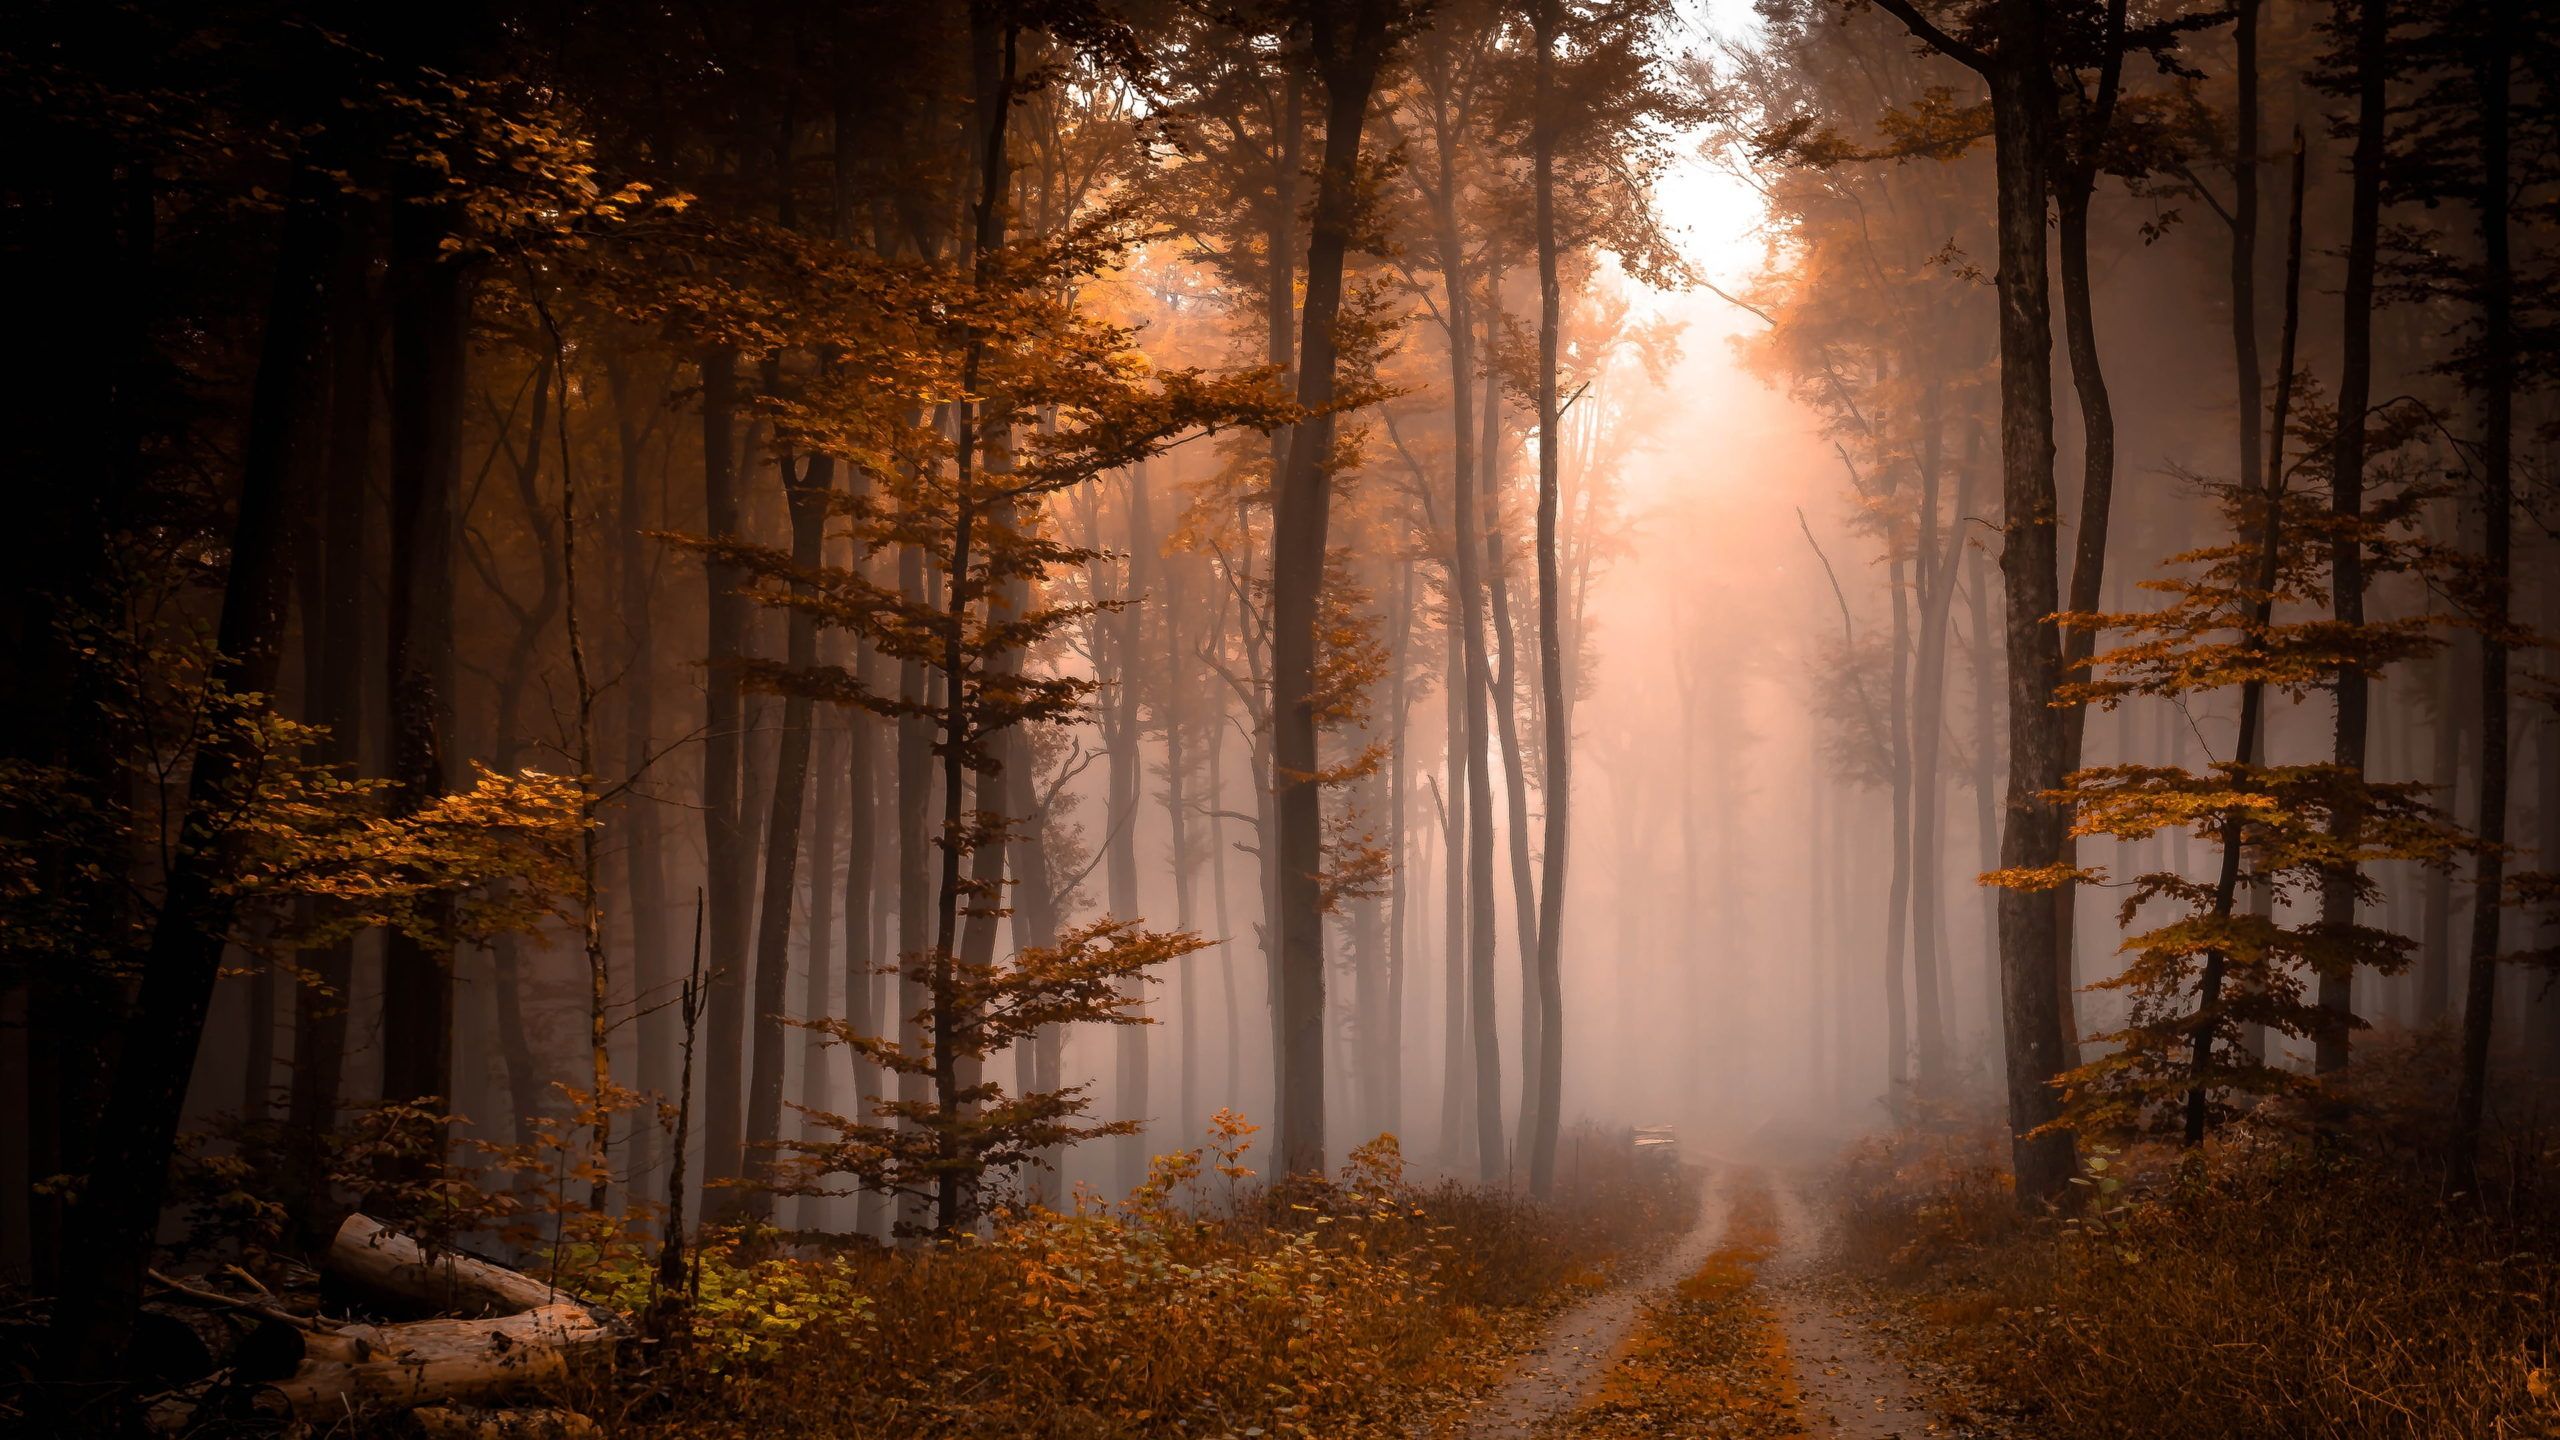 A foggy forest with a path in the middle - Fog, nature, foggy forest